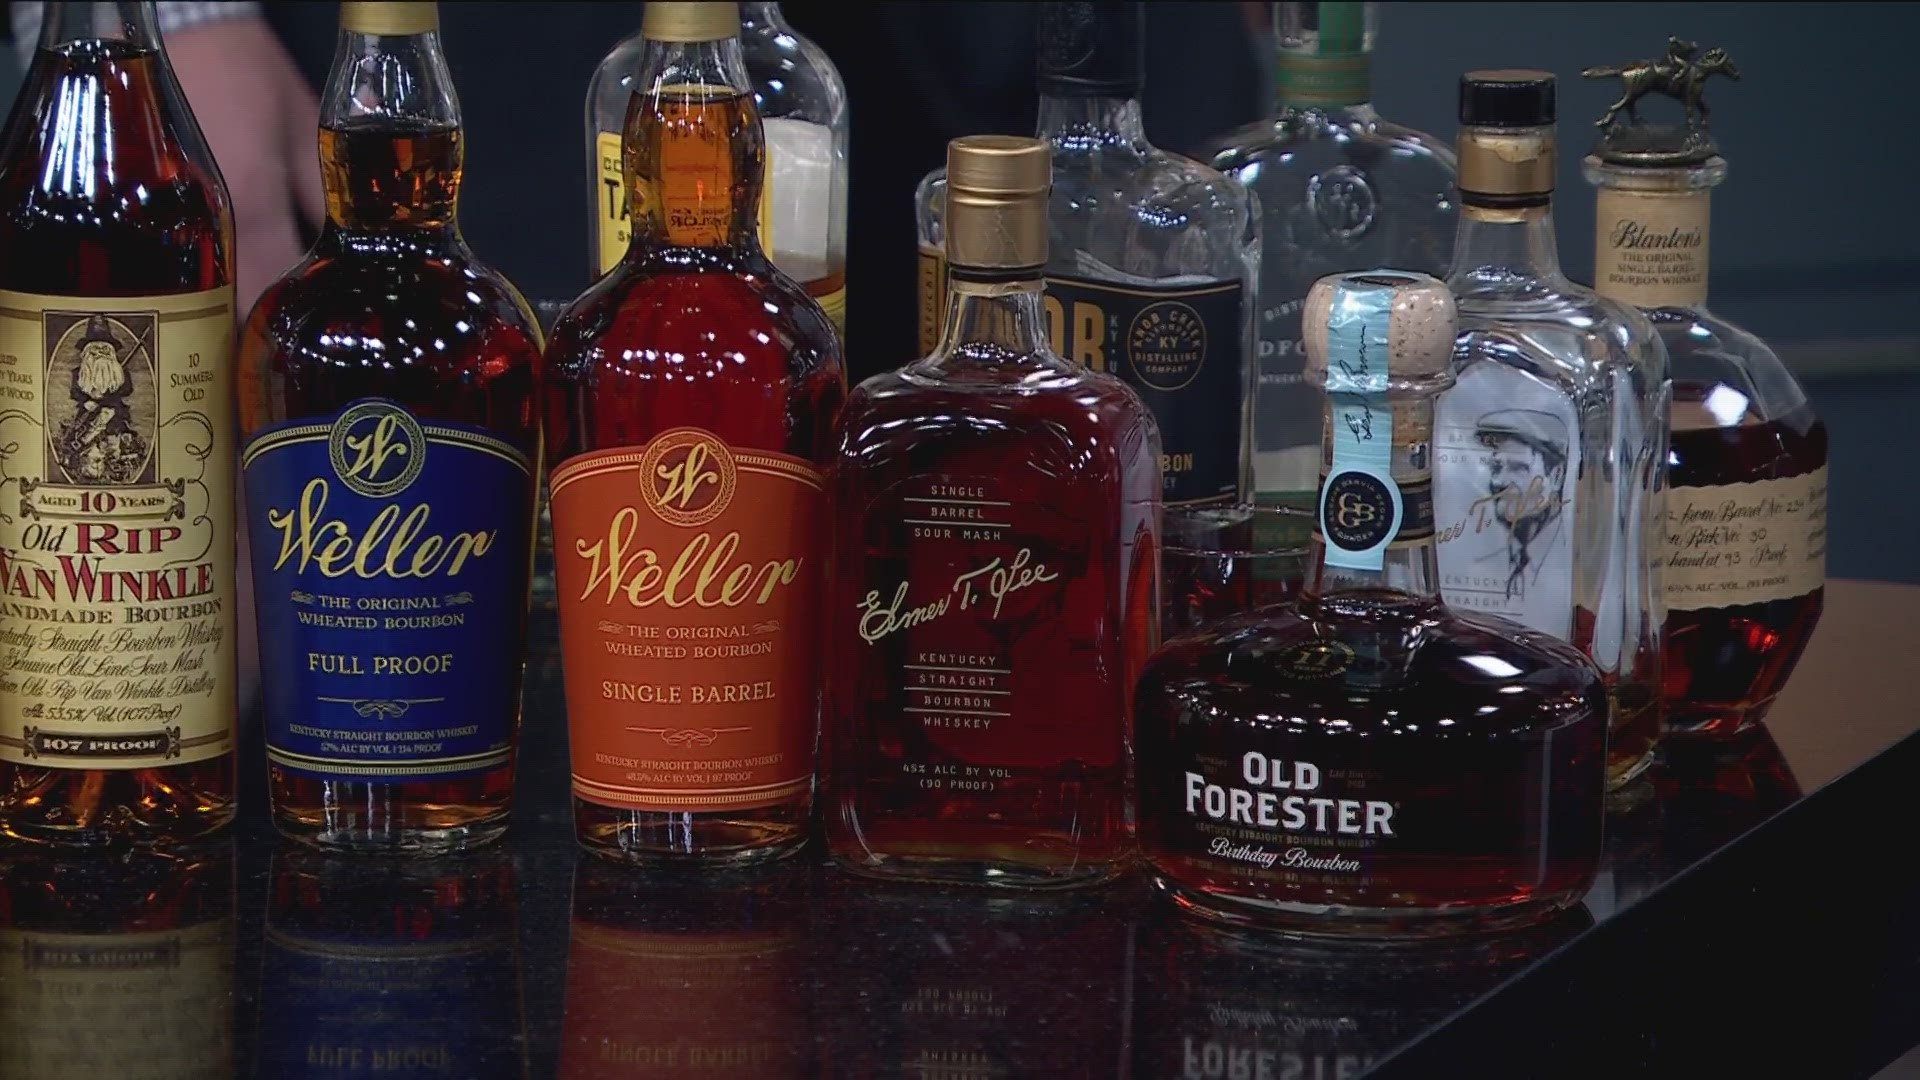 A whiskey-lovers tasting event is being held on Wednesday, March 22 at the Nicollet Island Inn.